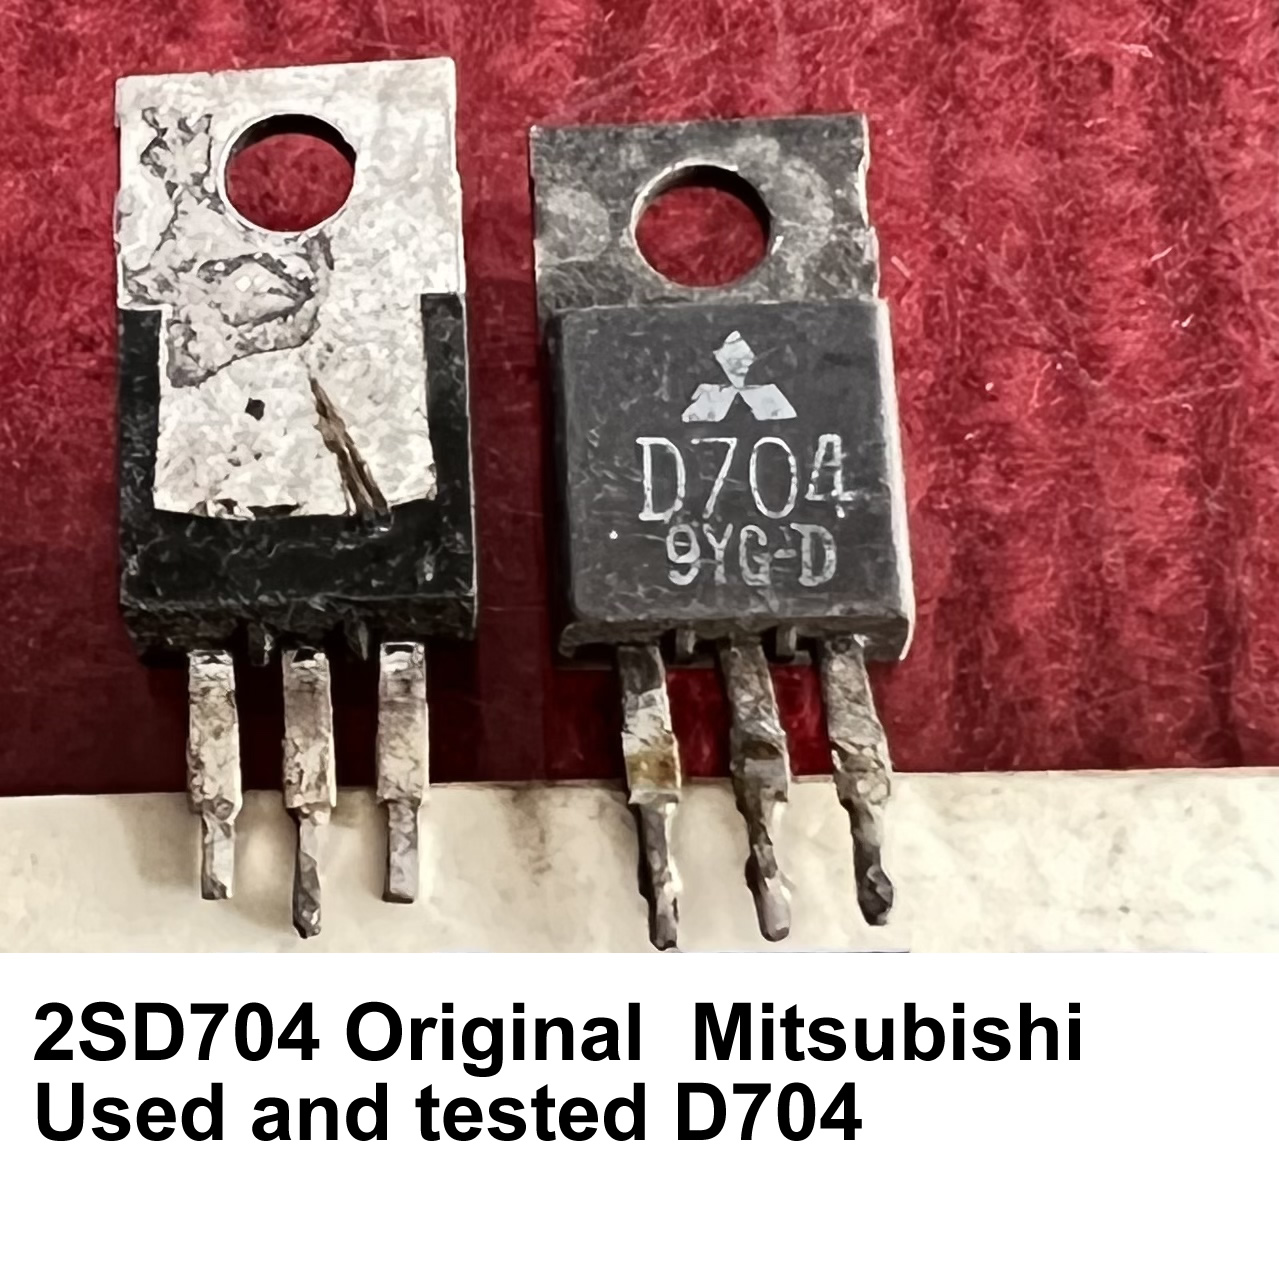 2SD704 Mitsubishi Used and tested D704